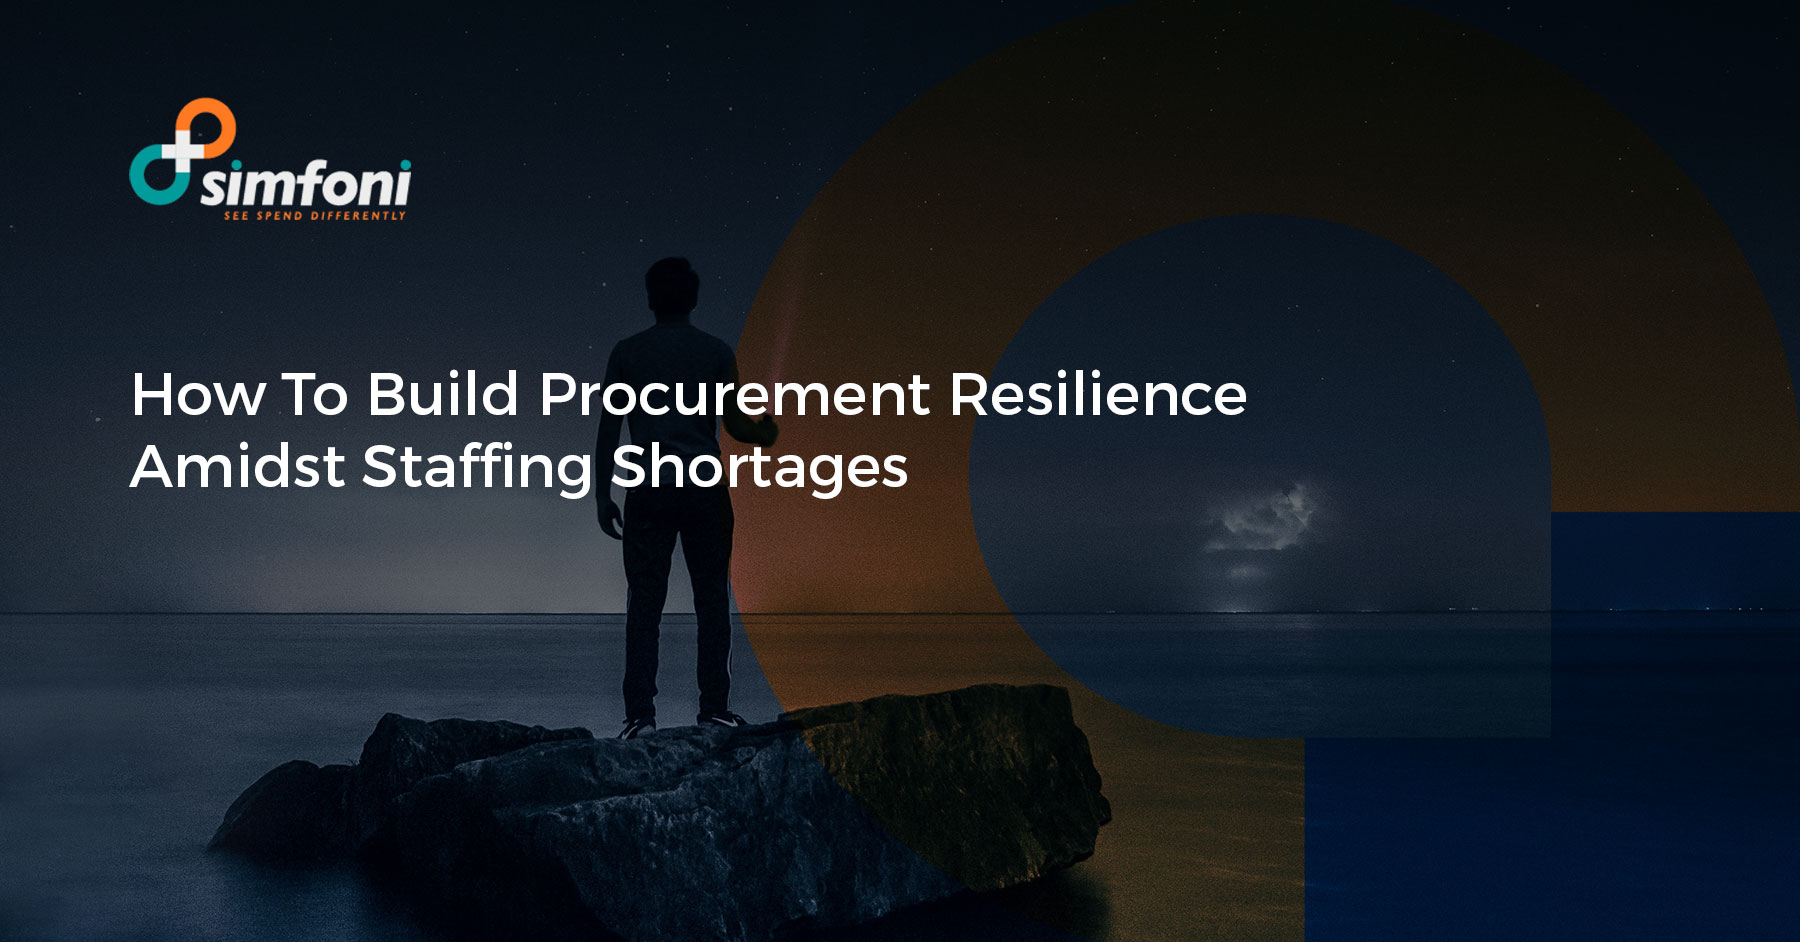 How To Build Procurement Resilience Amidst Staffing Shortages